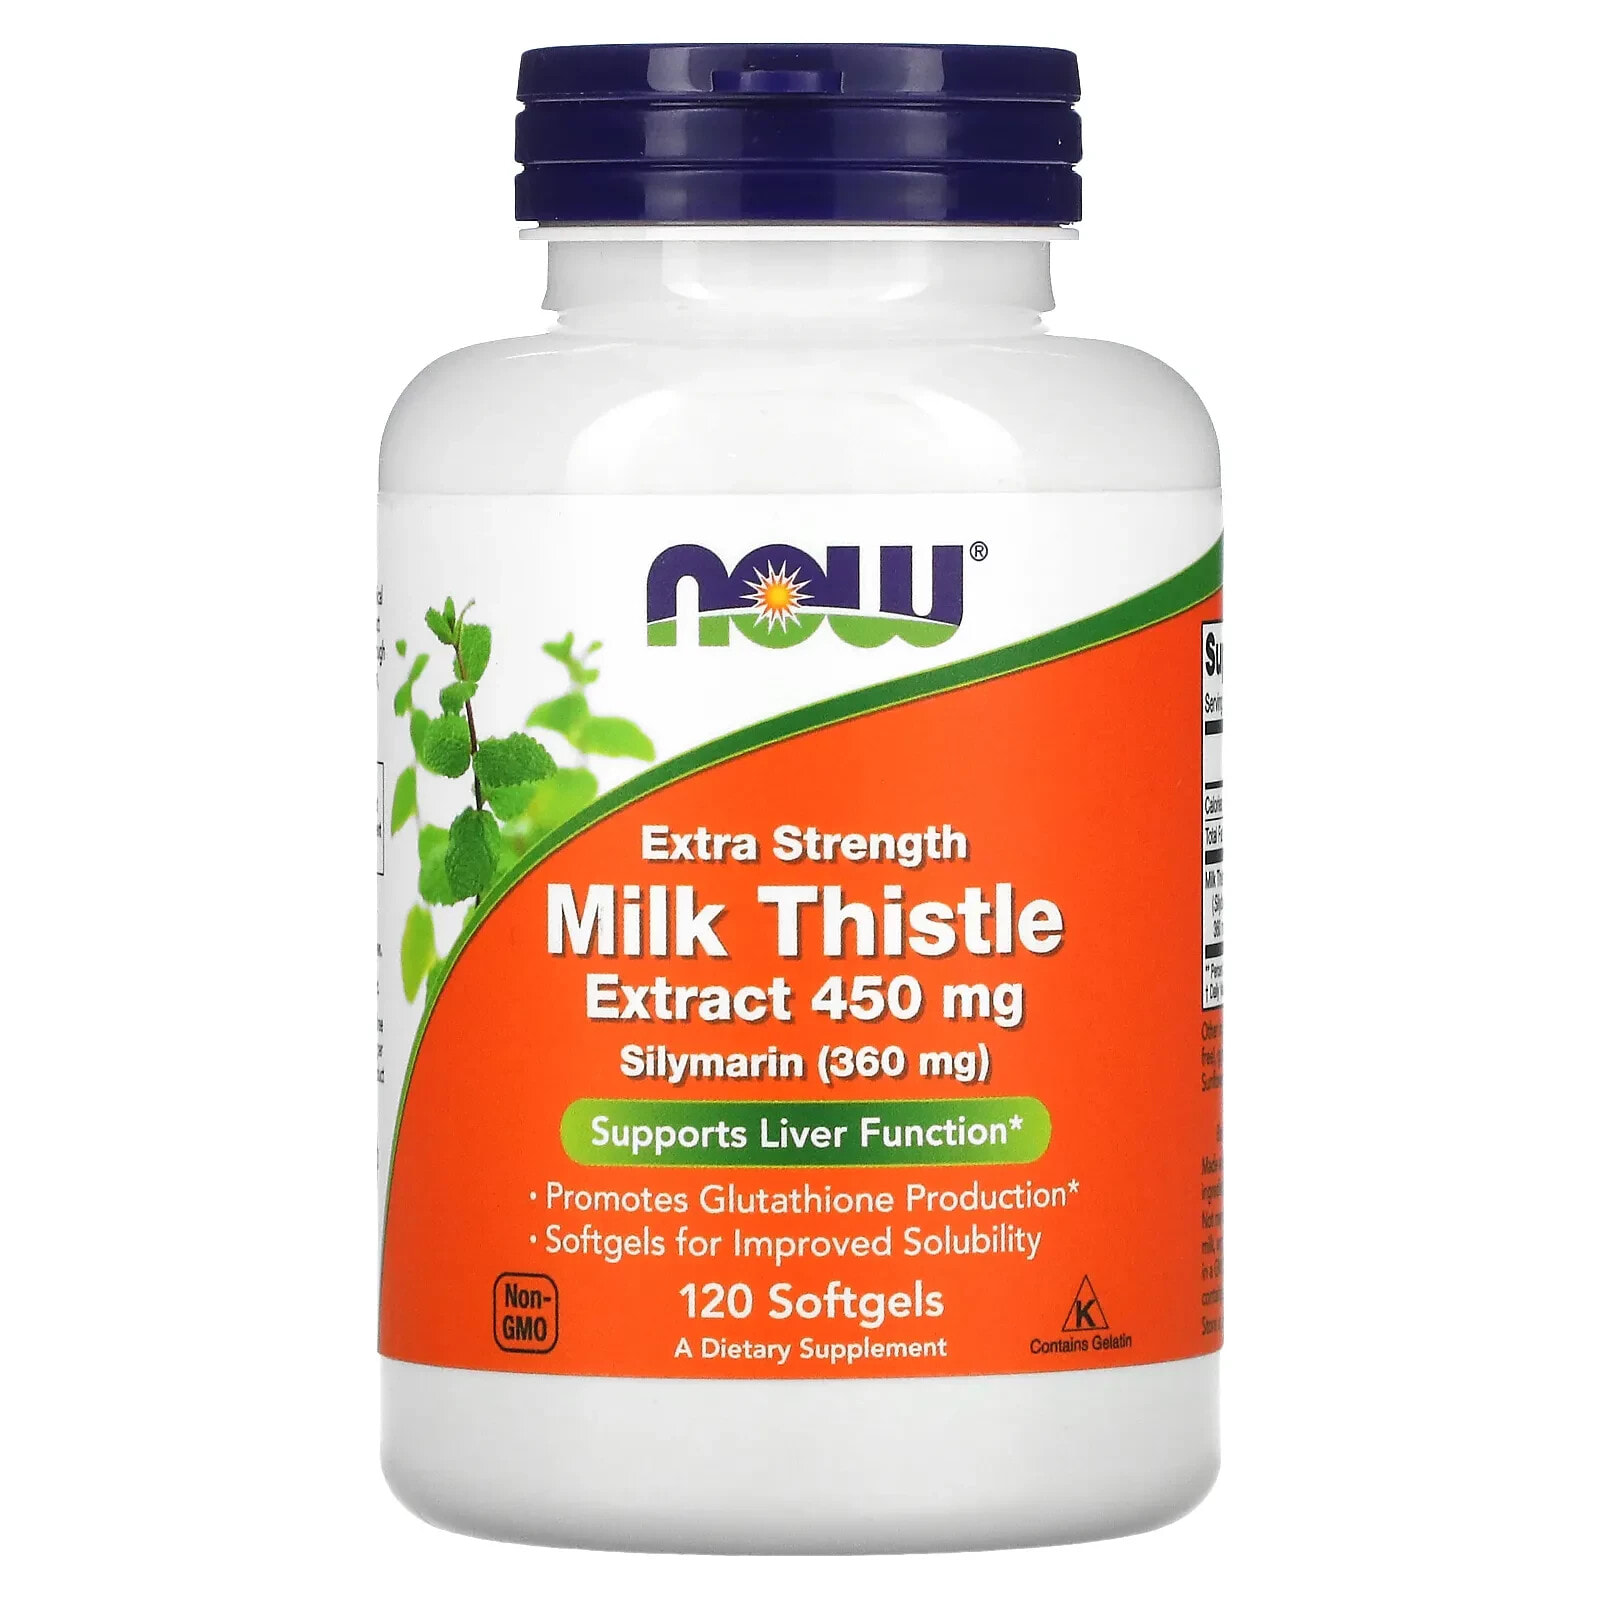 Milk Thistle Extract, Extra Strength, 450 mg, 120 Softgels